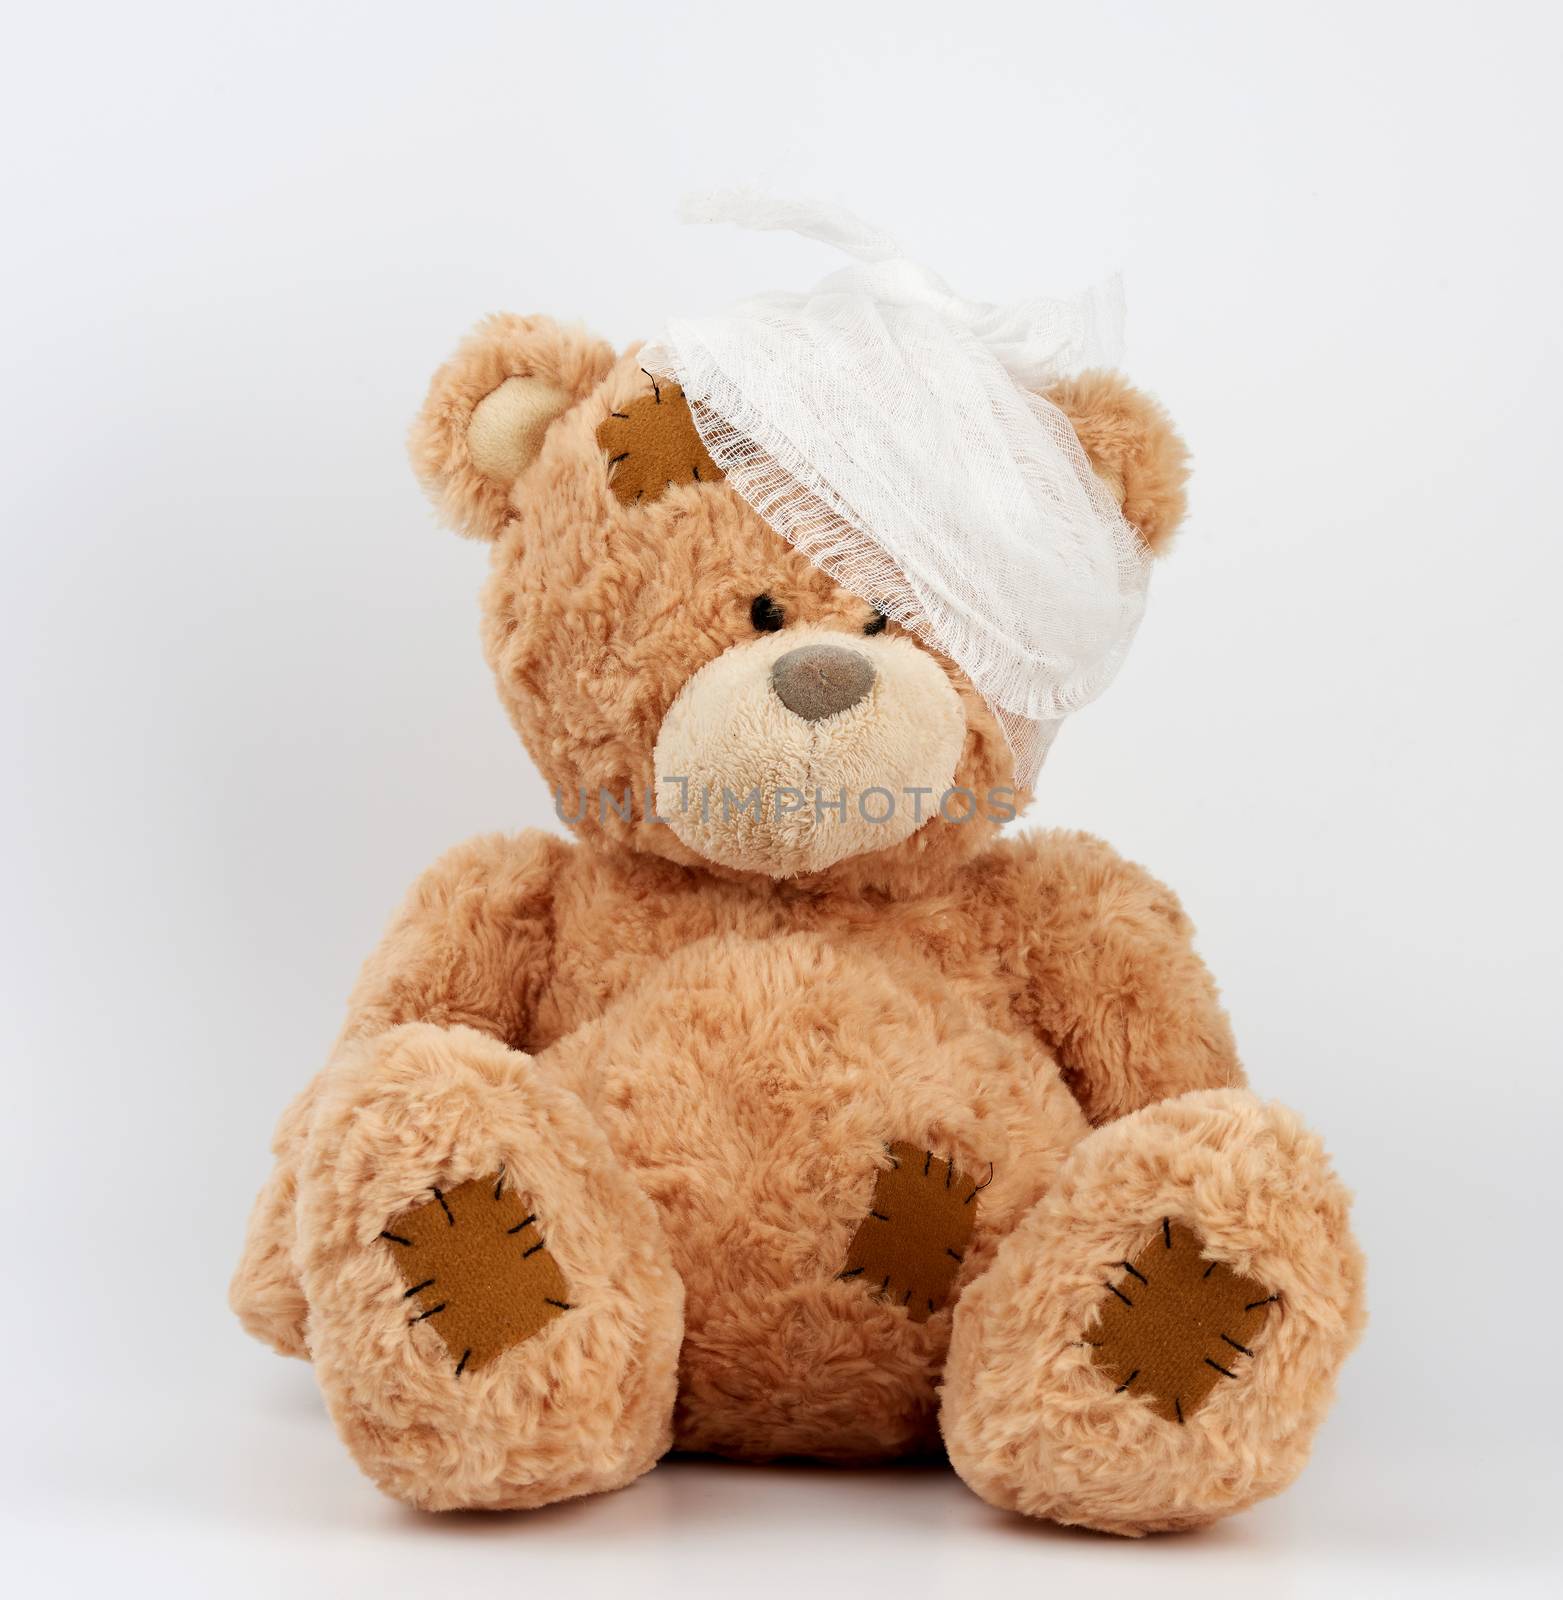 big teddy bear with a bandaged head in a white medical bandage on a white background, concept of child trauma, toy with patches